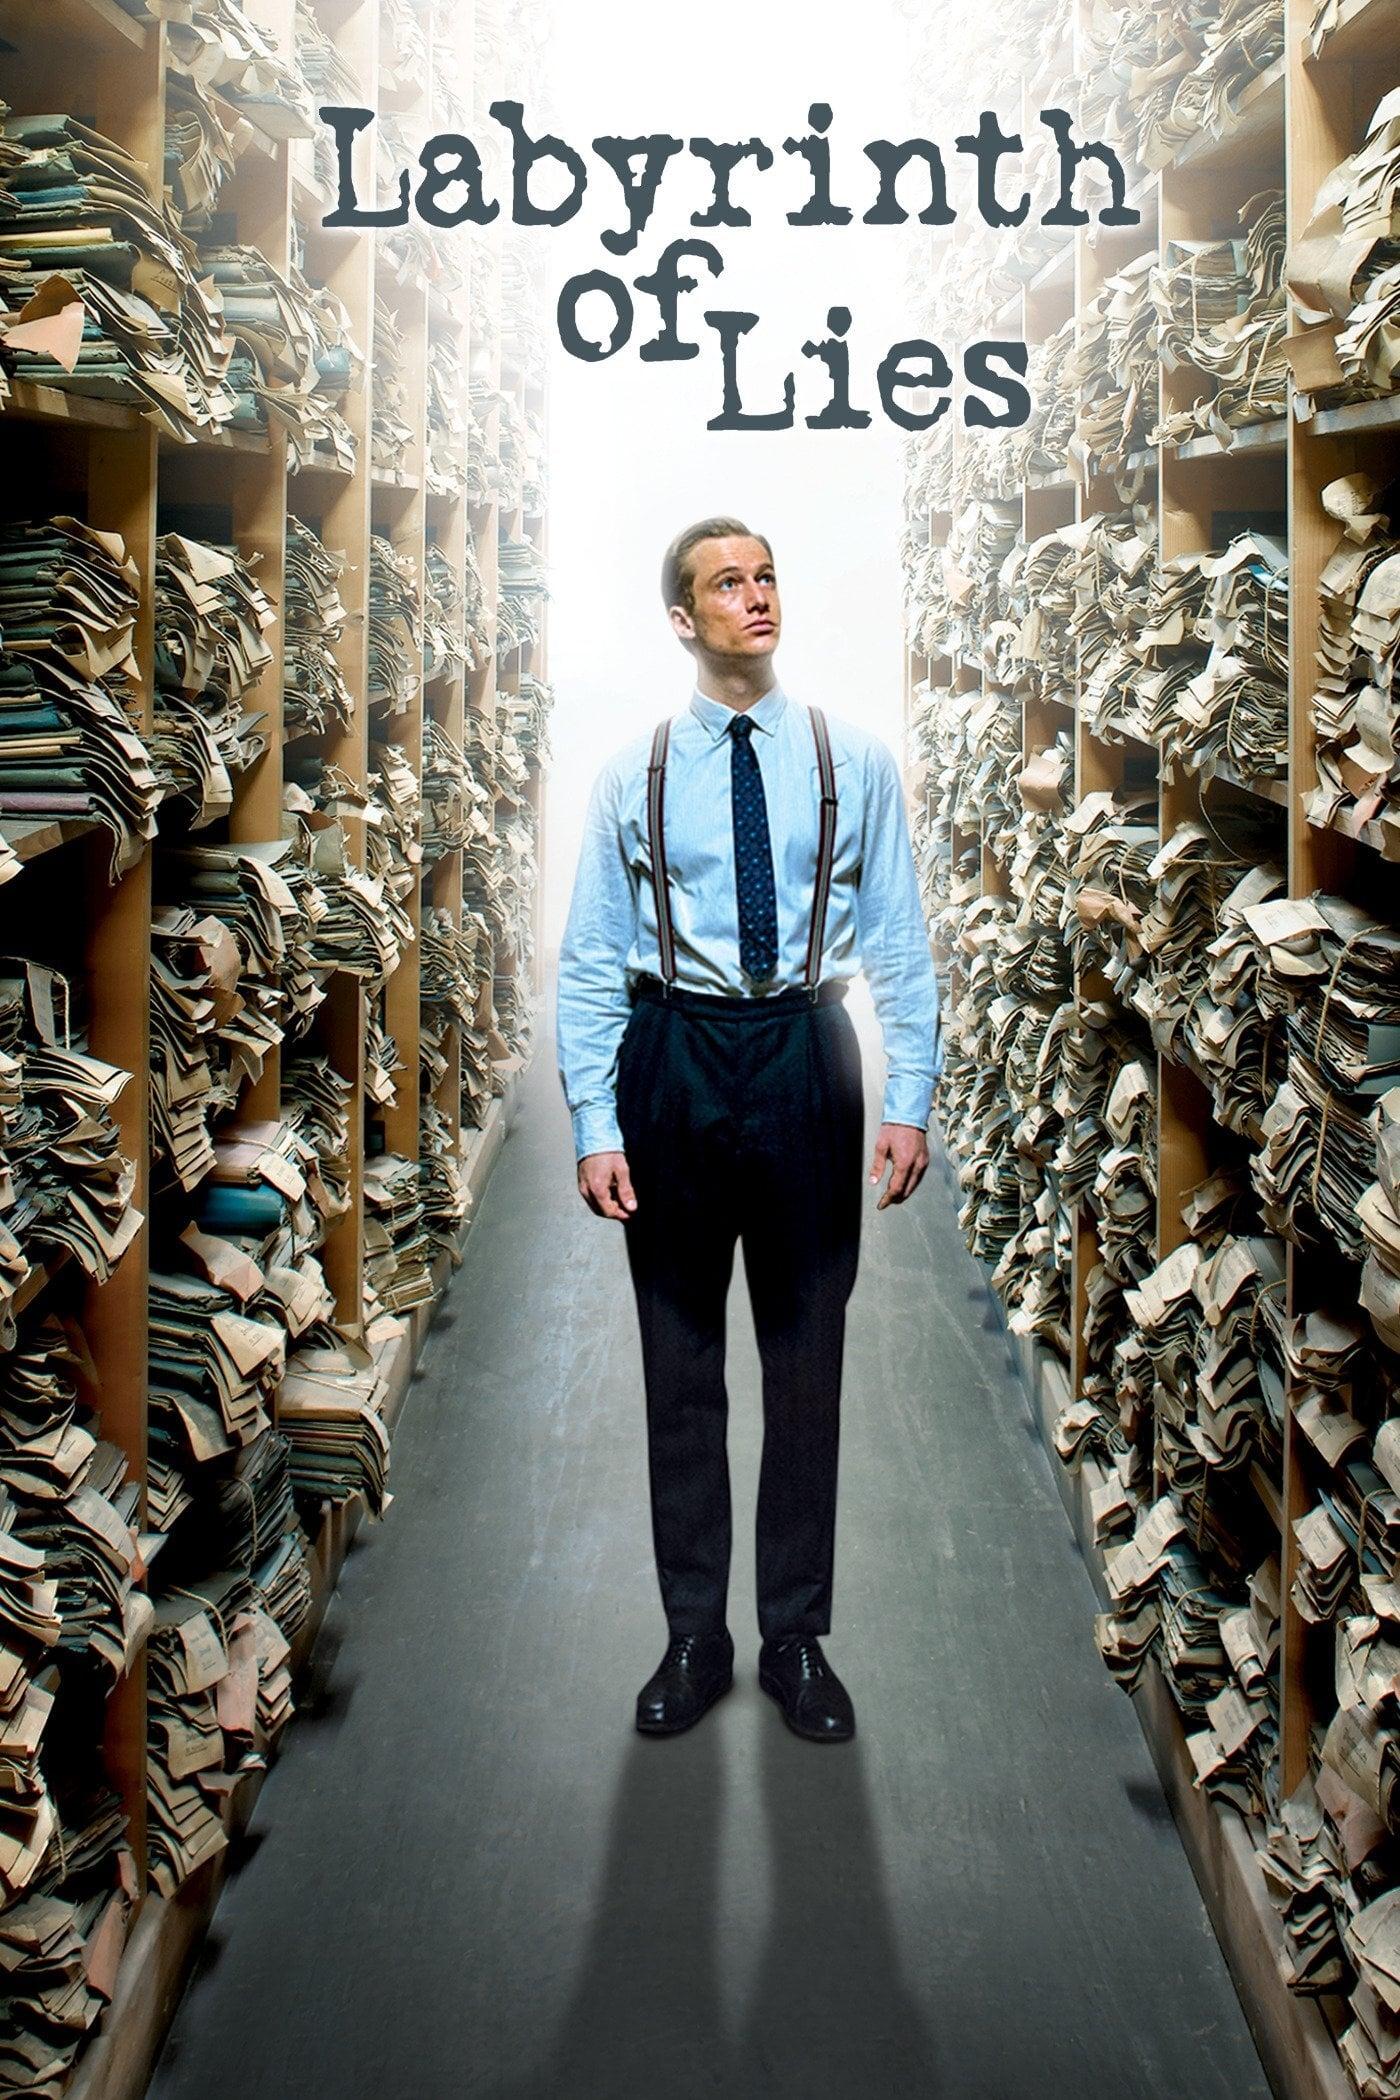 Labyrinth of Lies poster